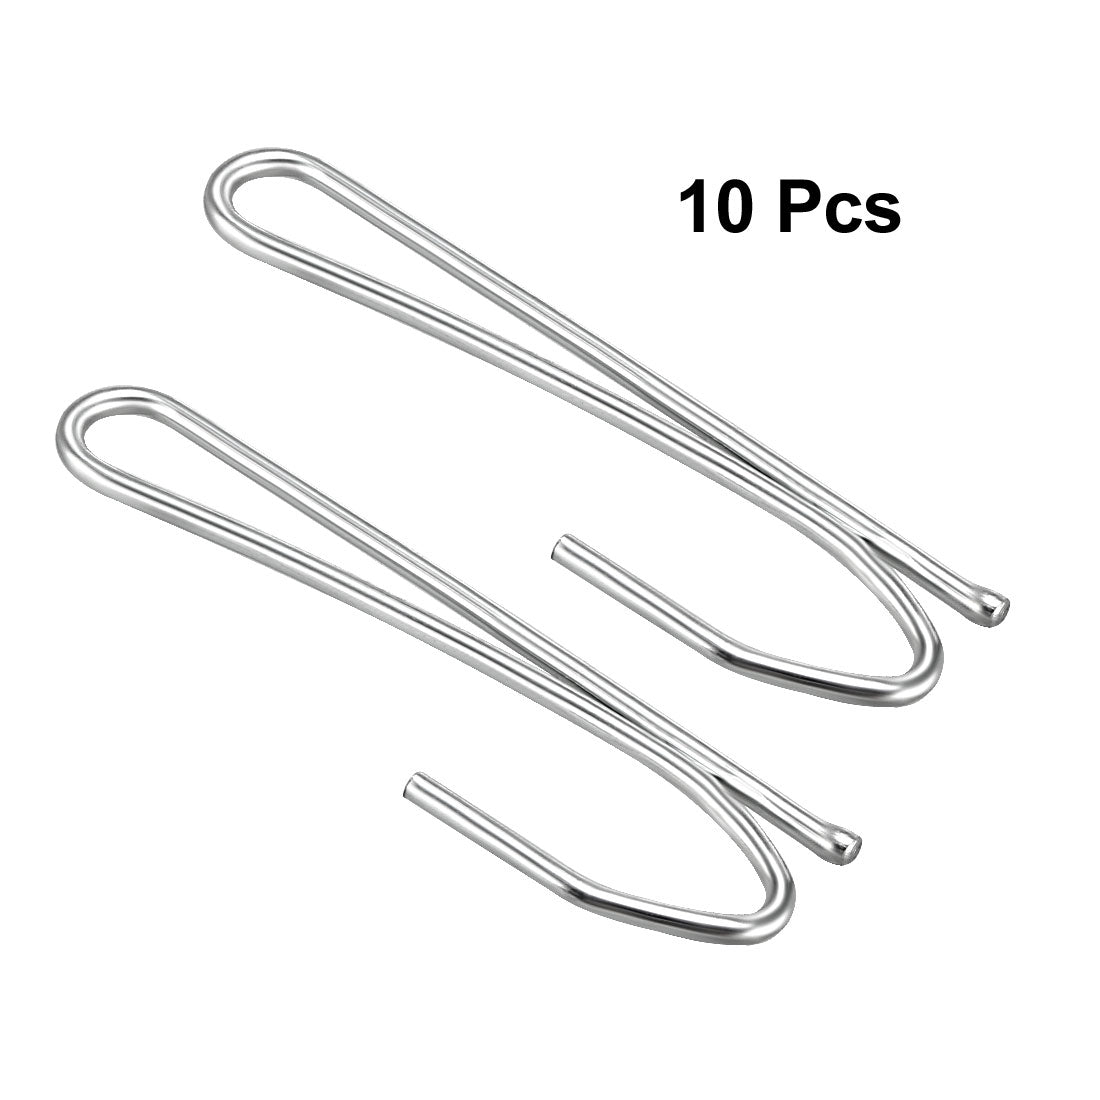 uxcell Uxcell Curtain Hooks Metal Single Prongs Pinch Pleat Drapery Hook for Drapes Tapes Silver Tone 10 Pcs